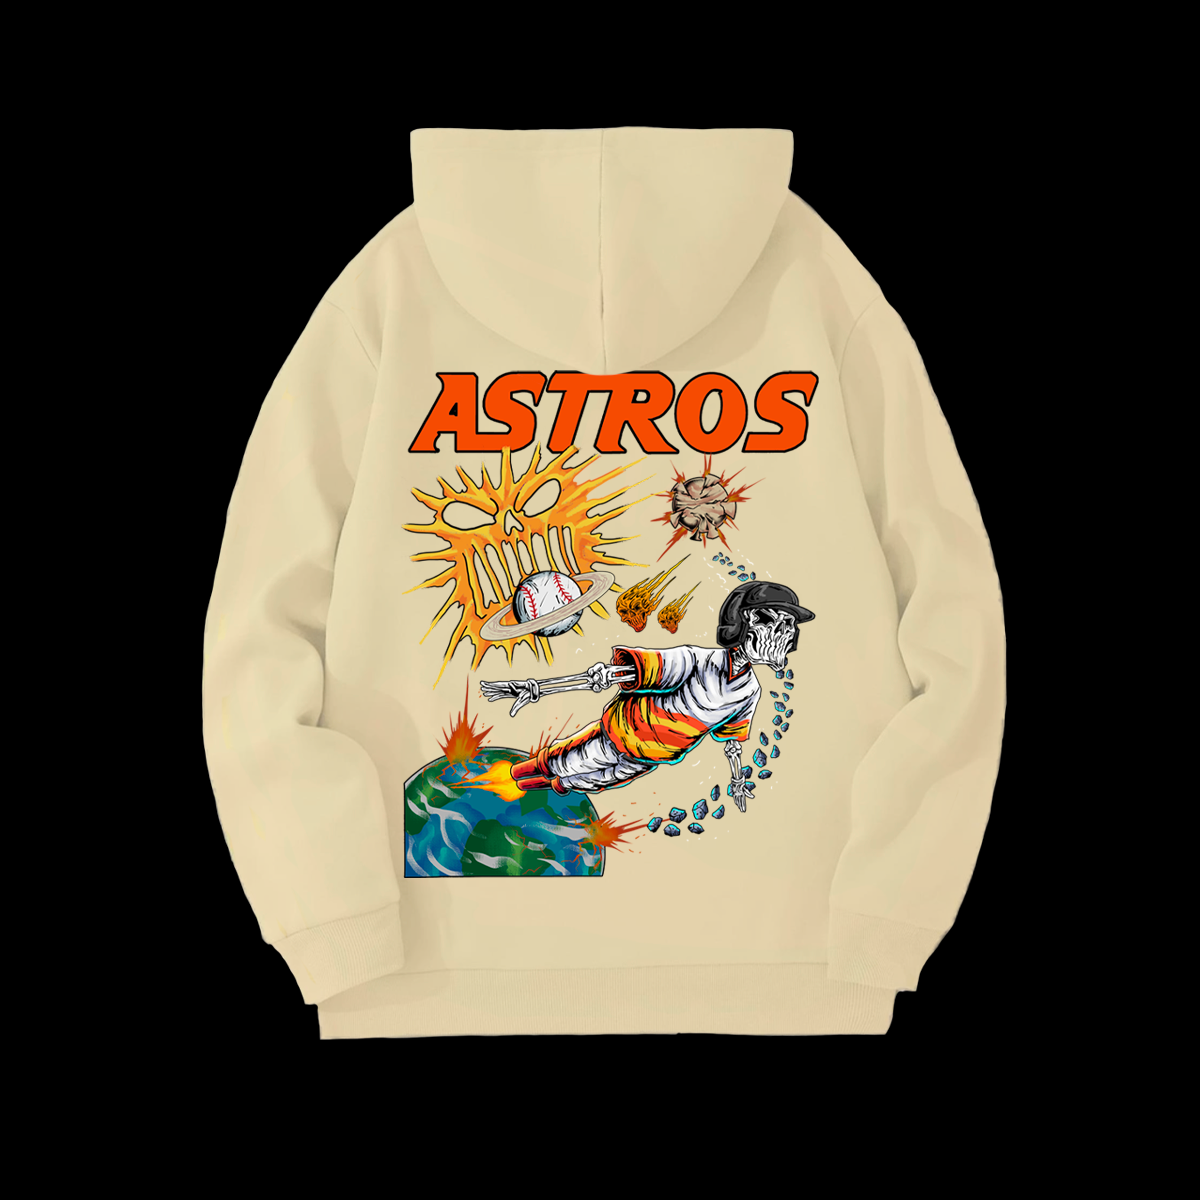 INCARNAPE ASTROS "SPACE CITY" PULL-OVER HOODIE